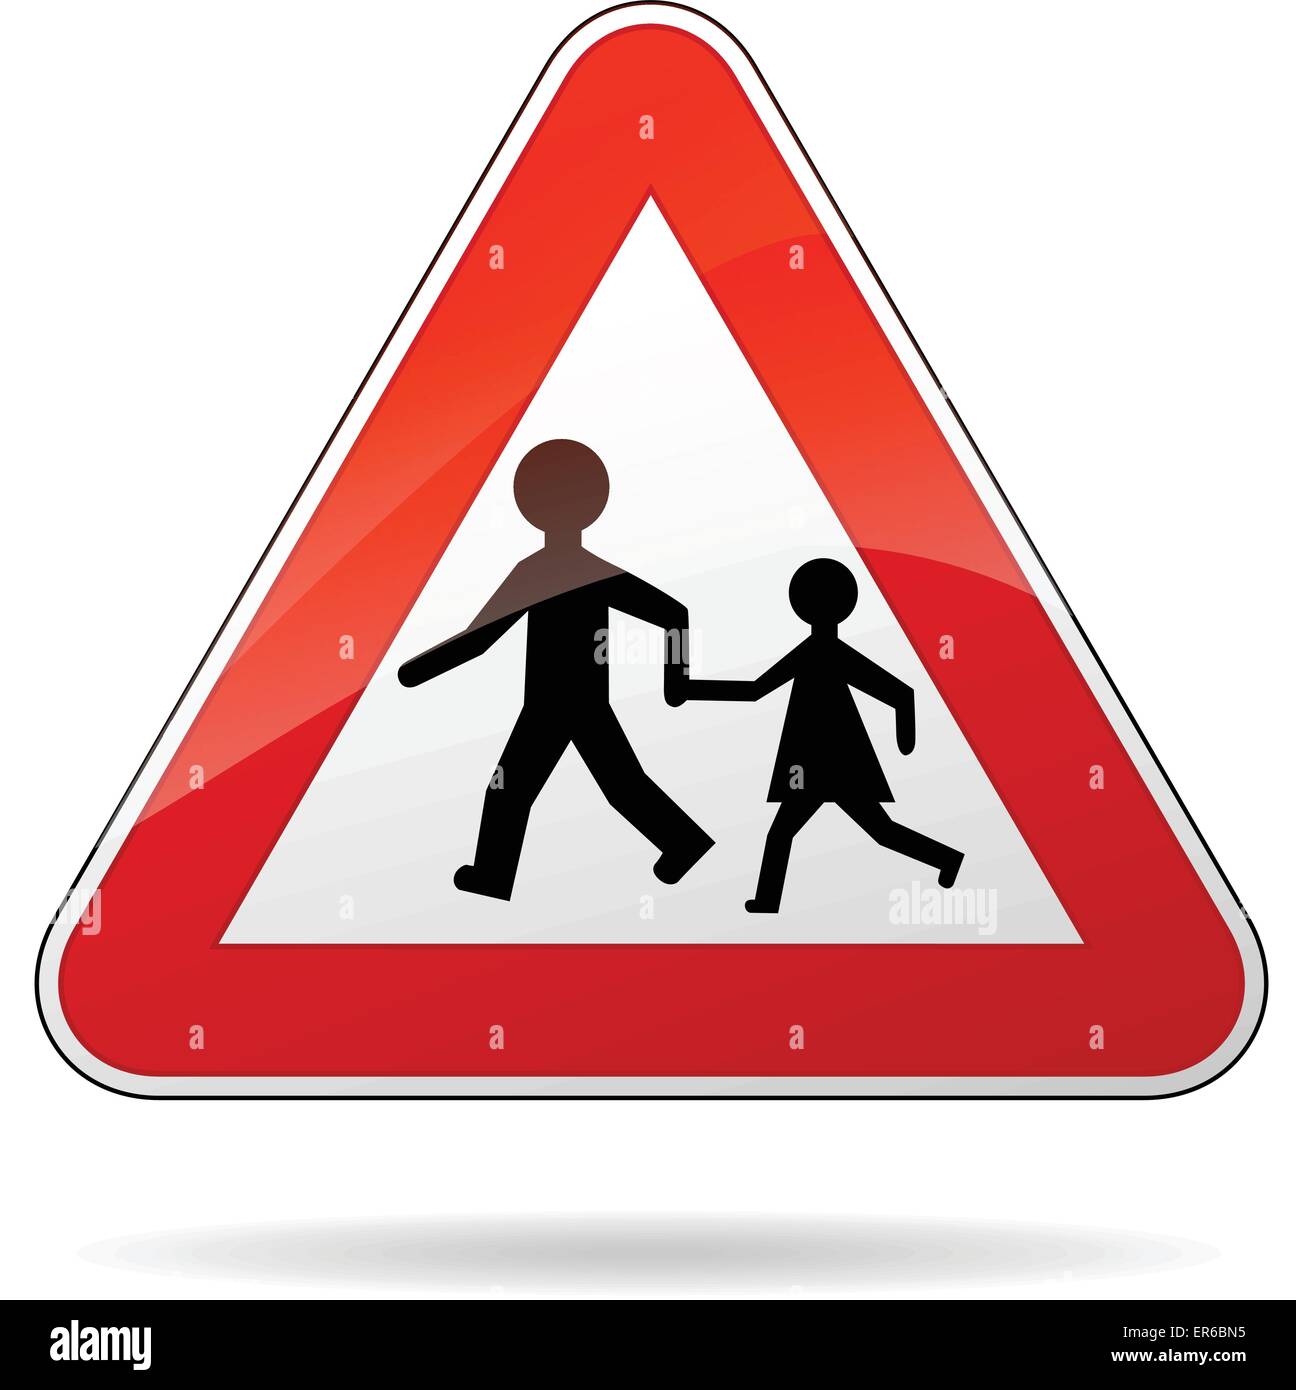 Vector illustration of triangle traffic sign for beware pedestrians Stock Vector